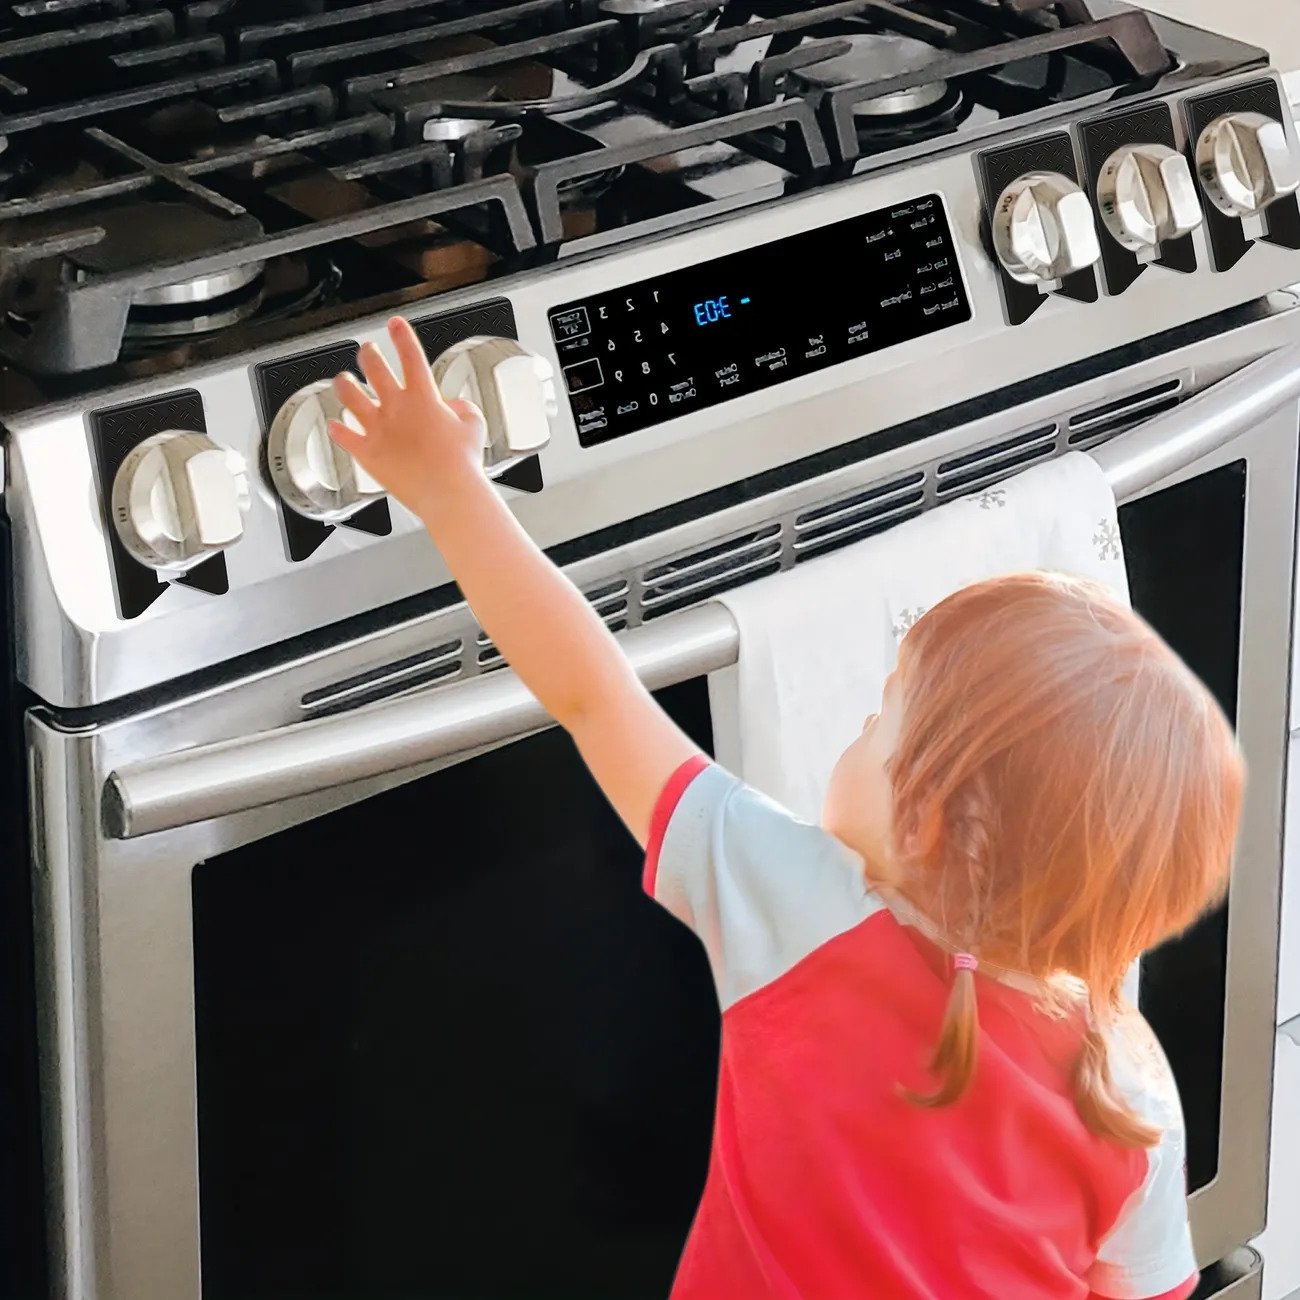 How To Fix The Error Code E40 For Samsung Cooktop